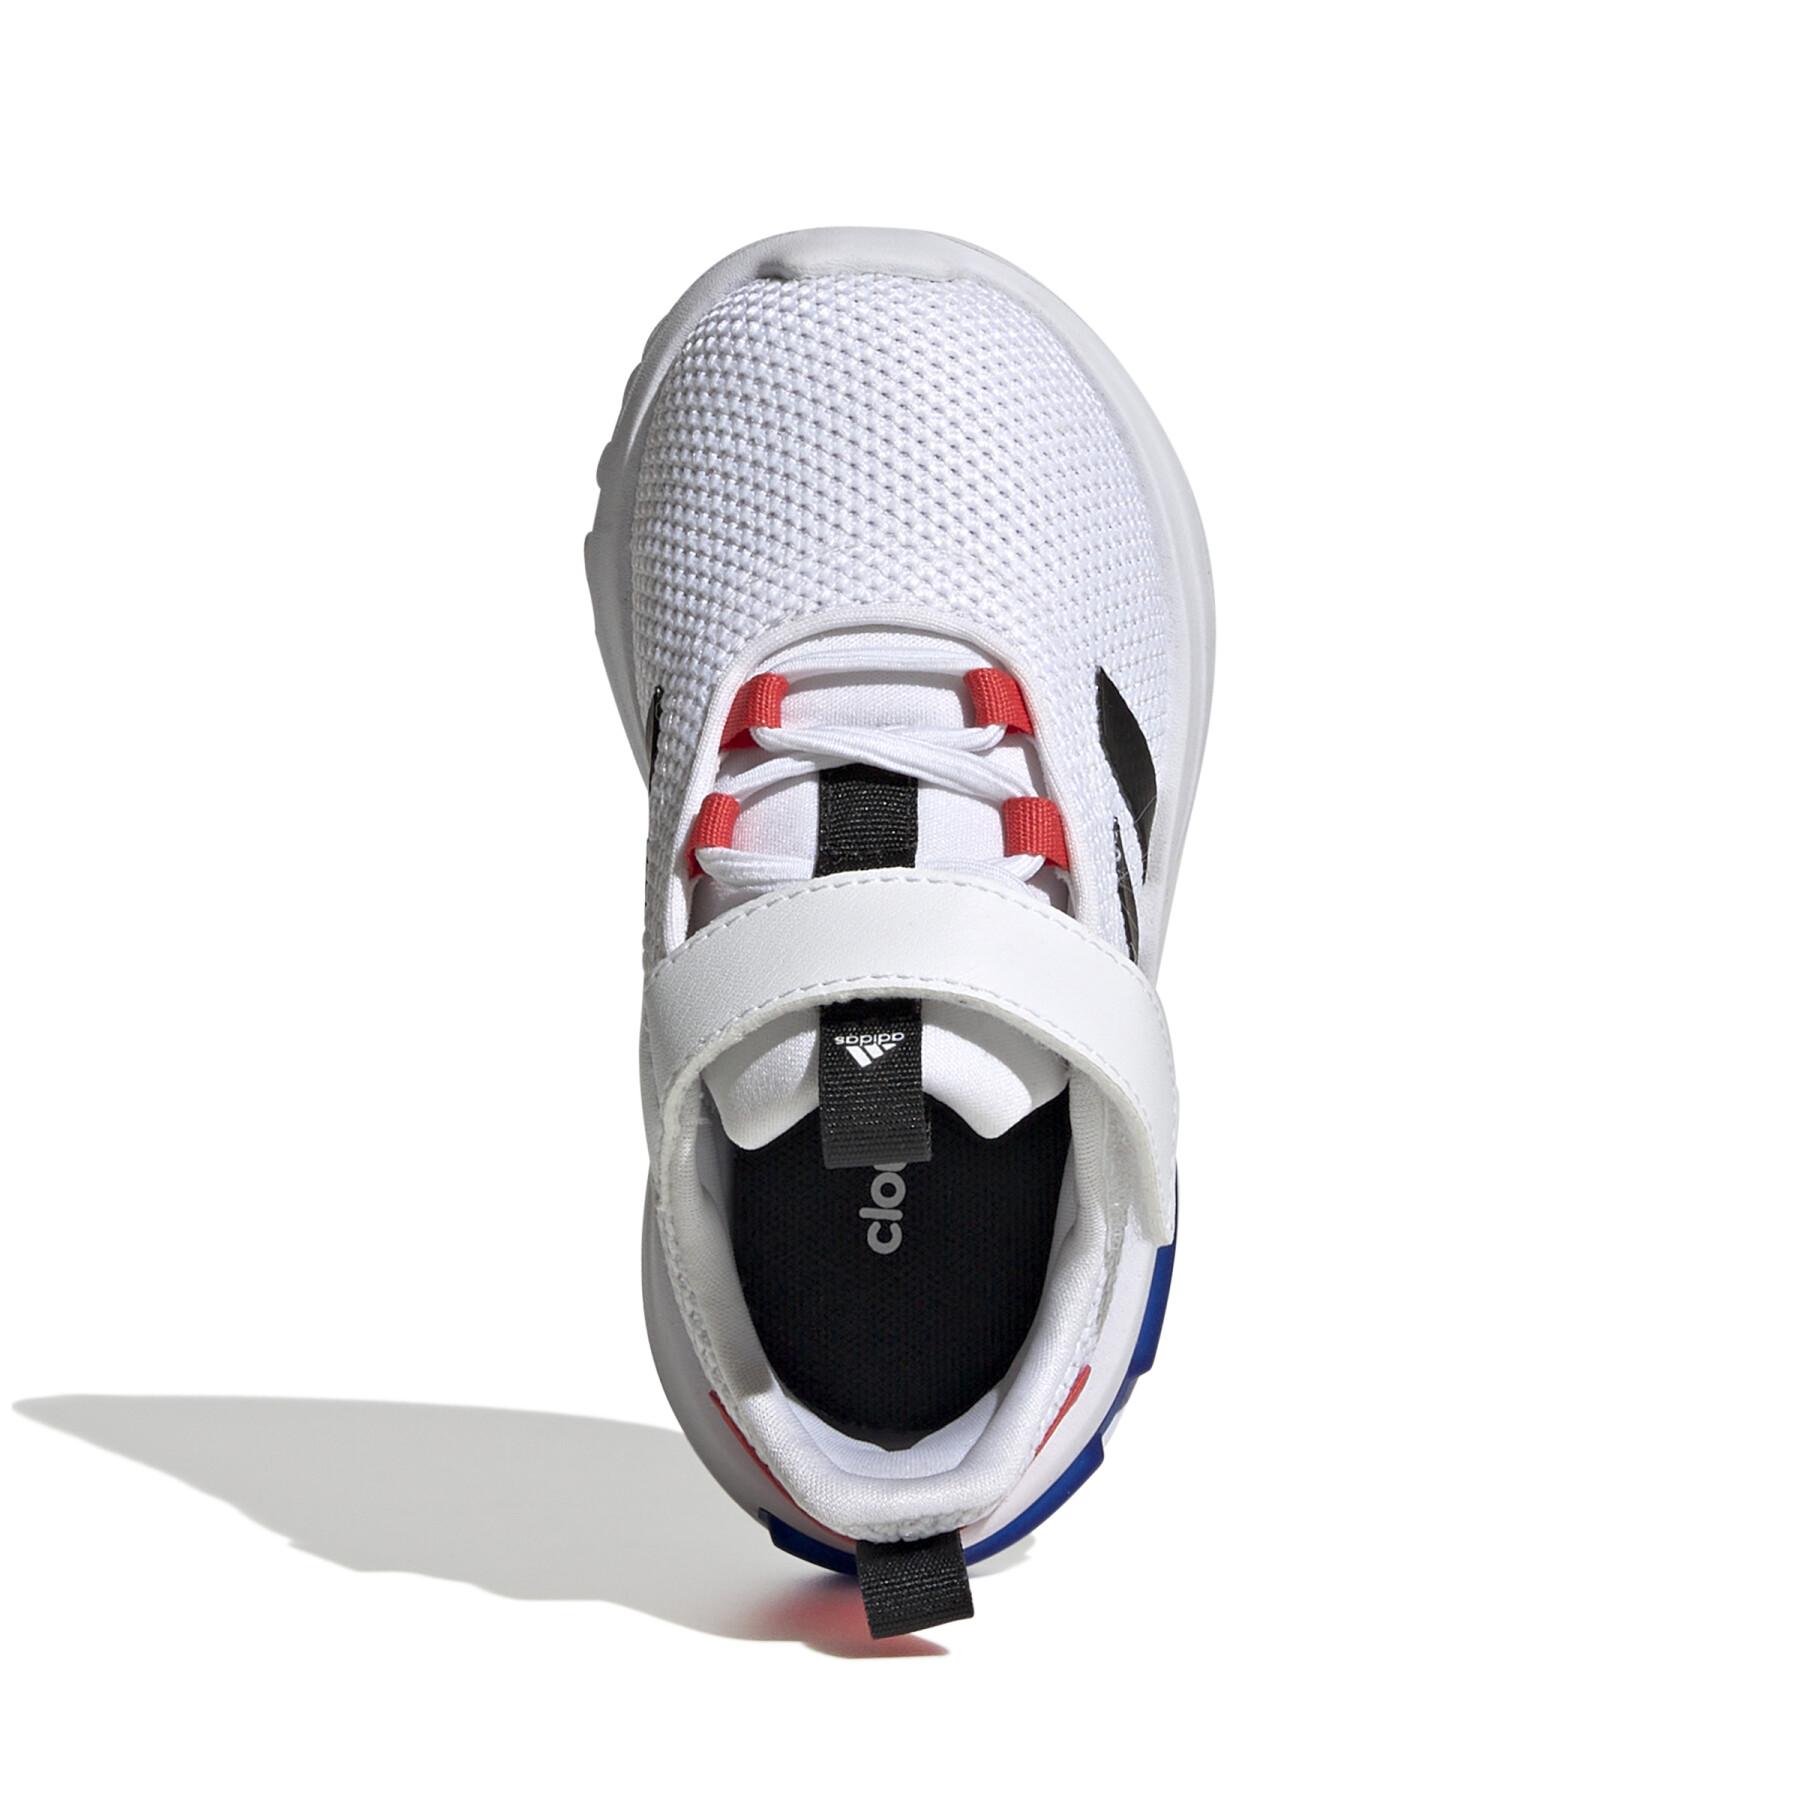 Baby sneakers adidas Racer Tr23